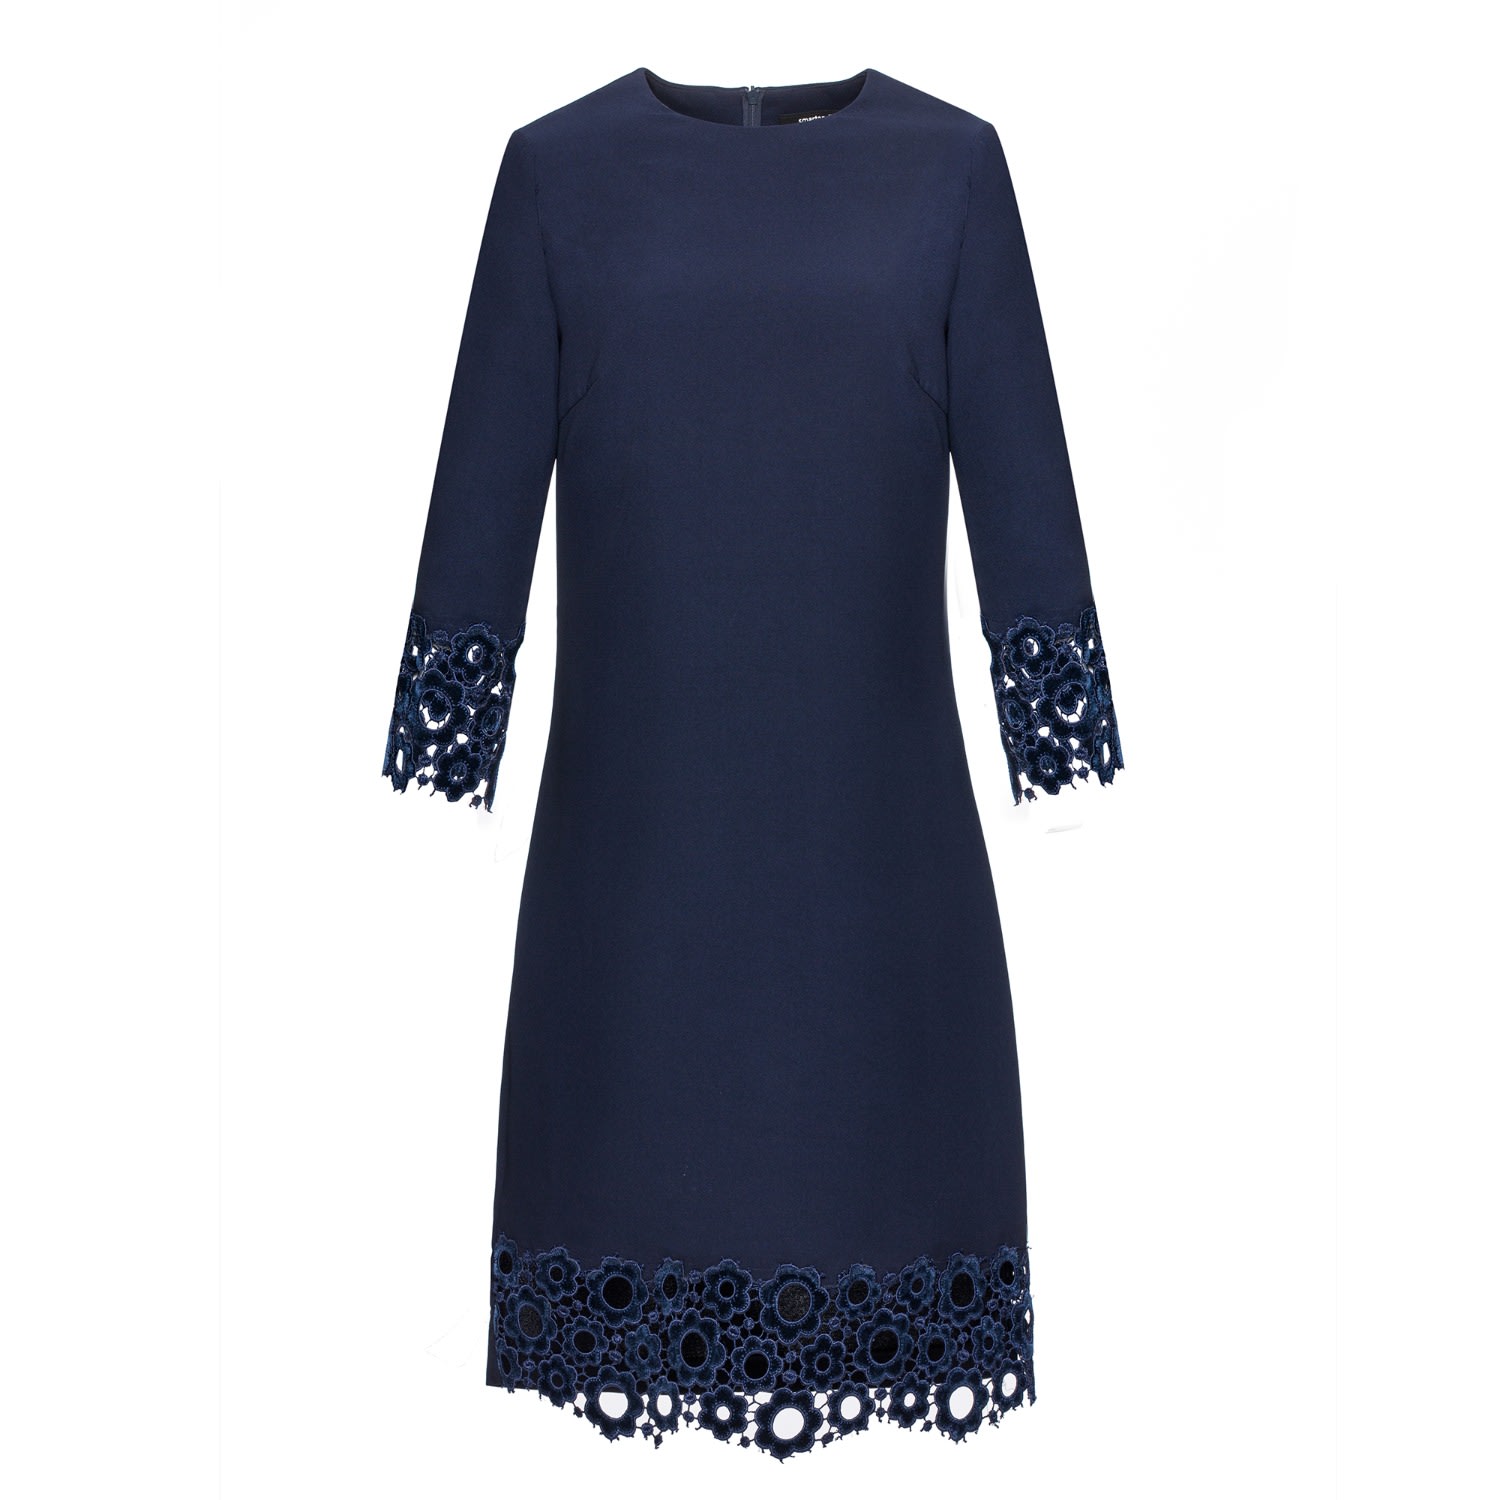 Women’s Blue Lace Trimmed Shift Dress Extra Small Smart and Joy